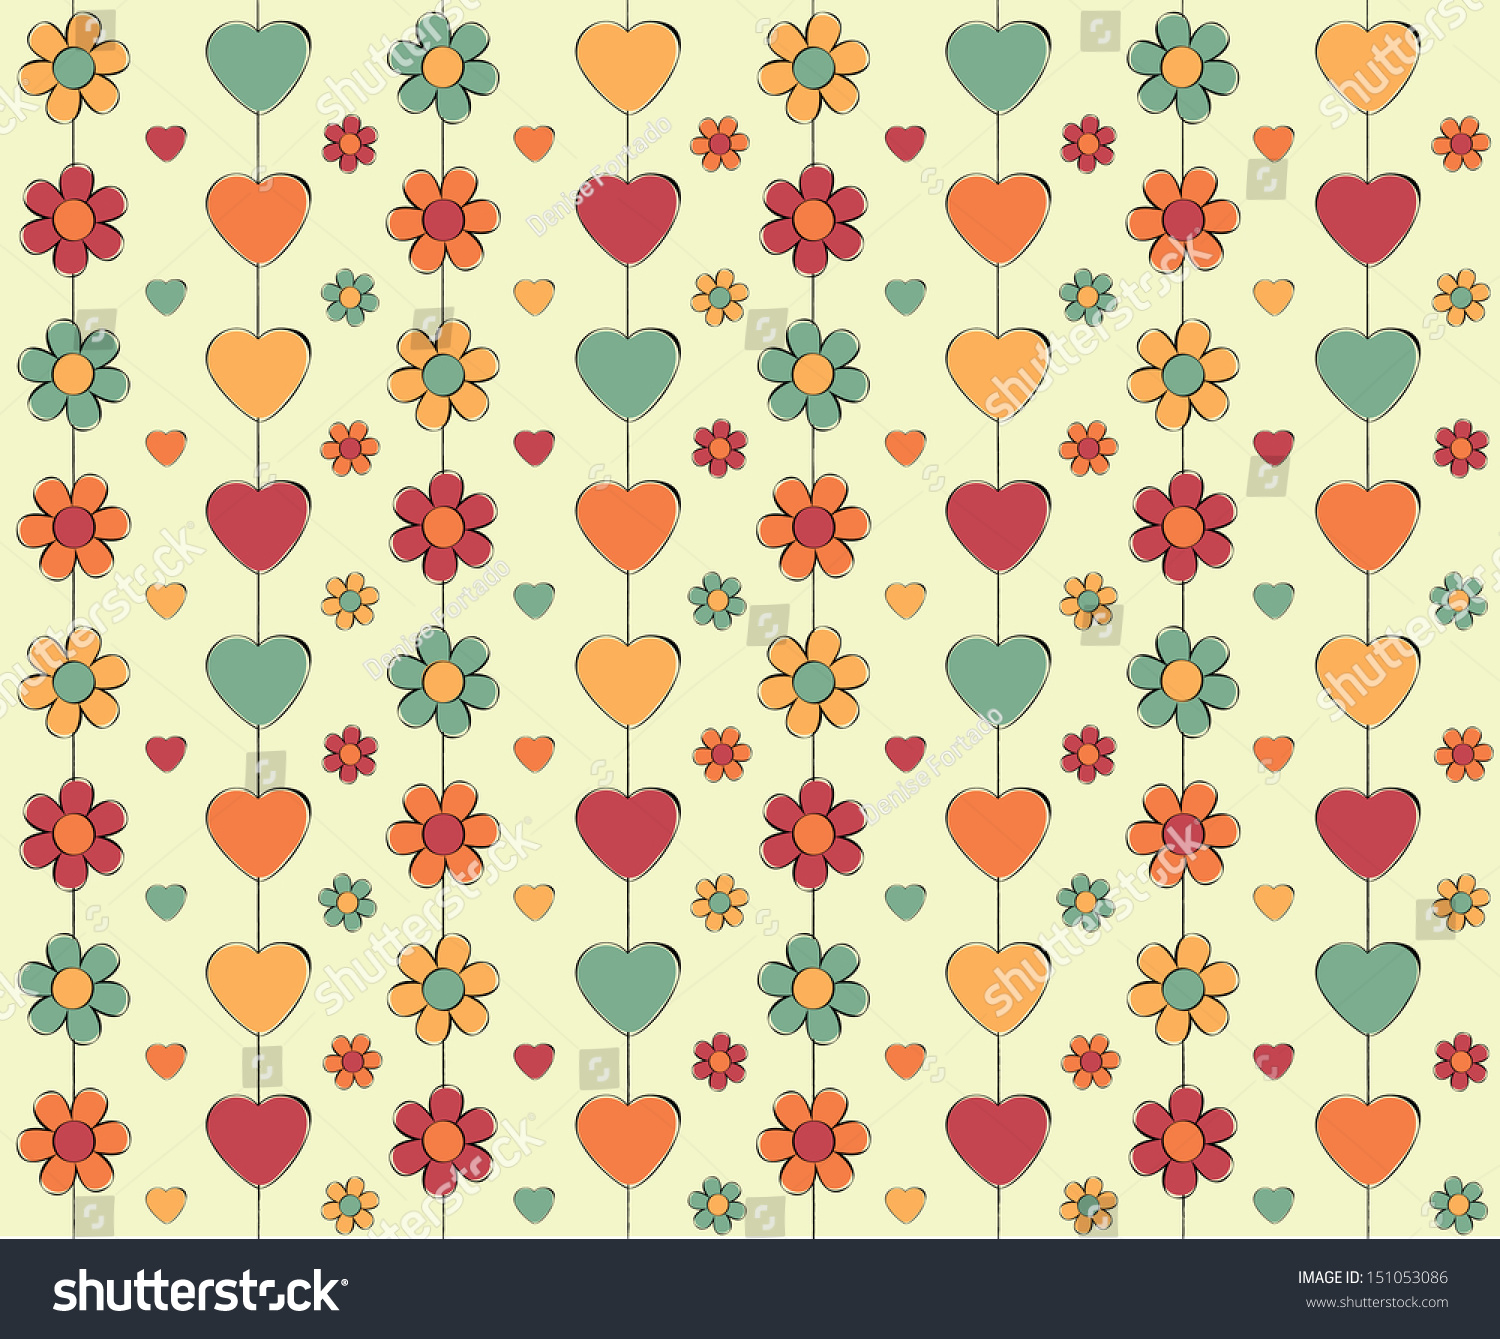 A Fun Illustrated Wallpaper Design With Flowers And Hearts 